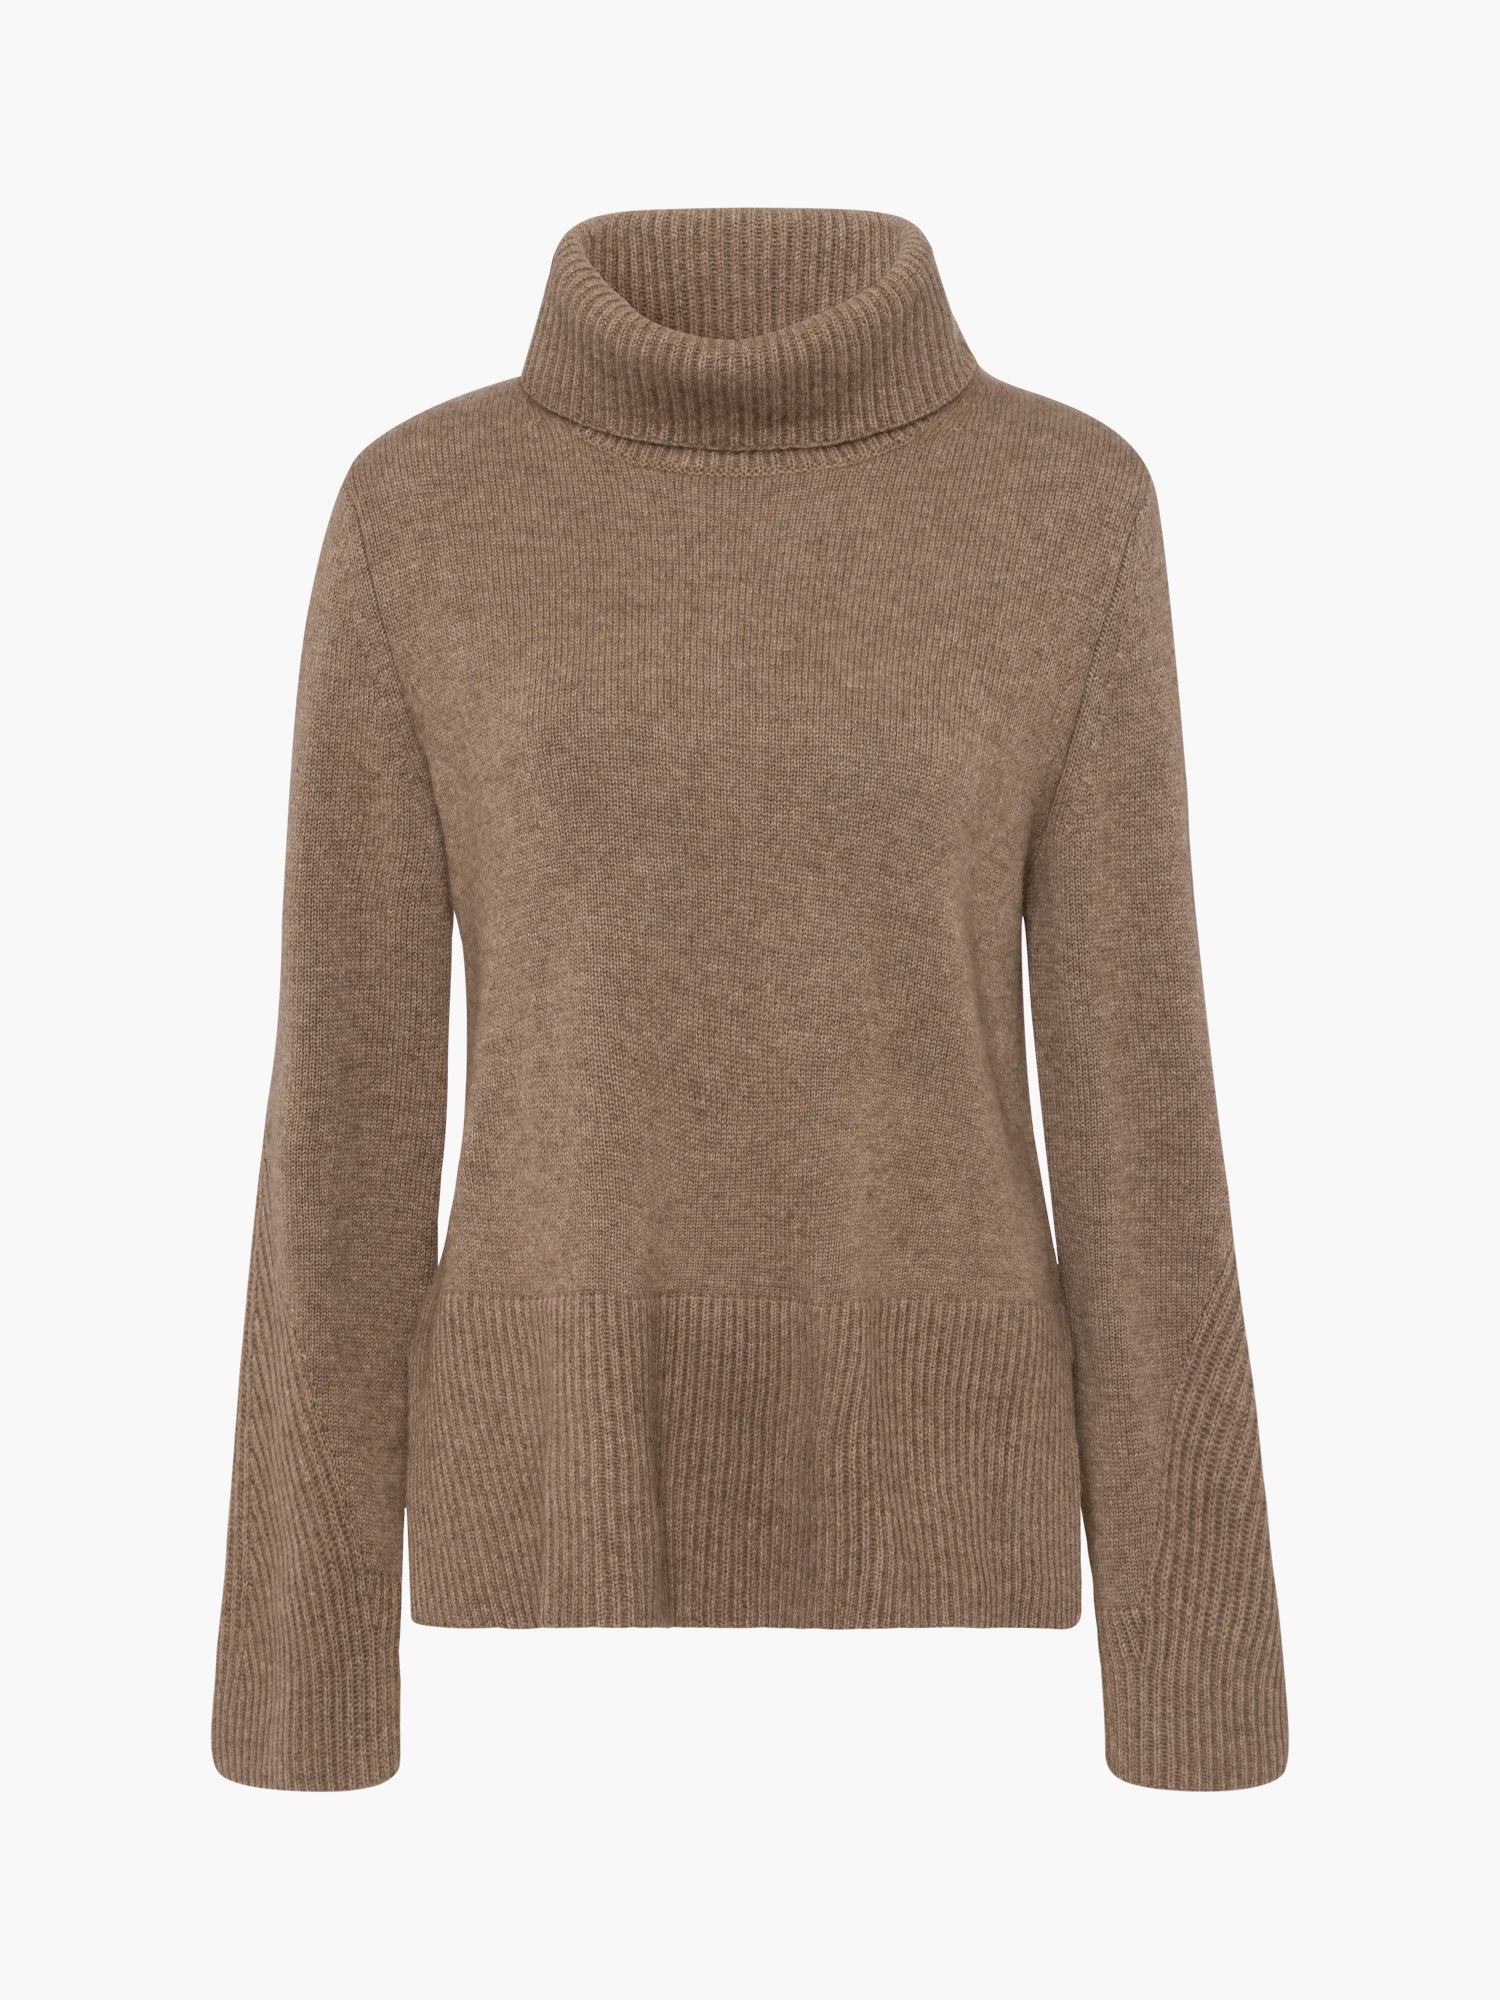 FTC-Cashmere-OUTLET-SALE-Pullover-Rollneck-Strick-ARCHIVE-COLLECTION.jpg